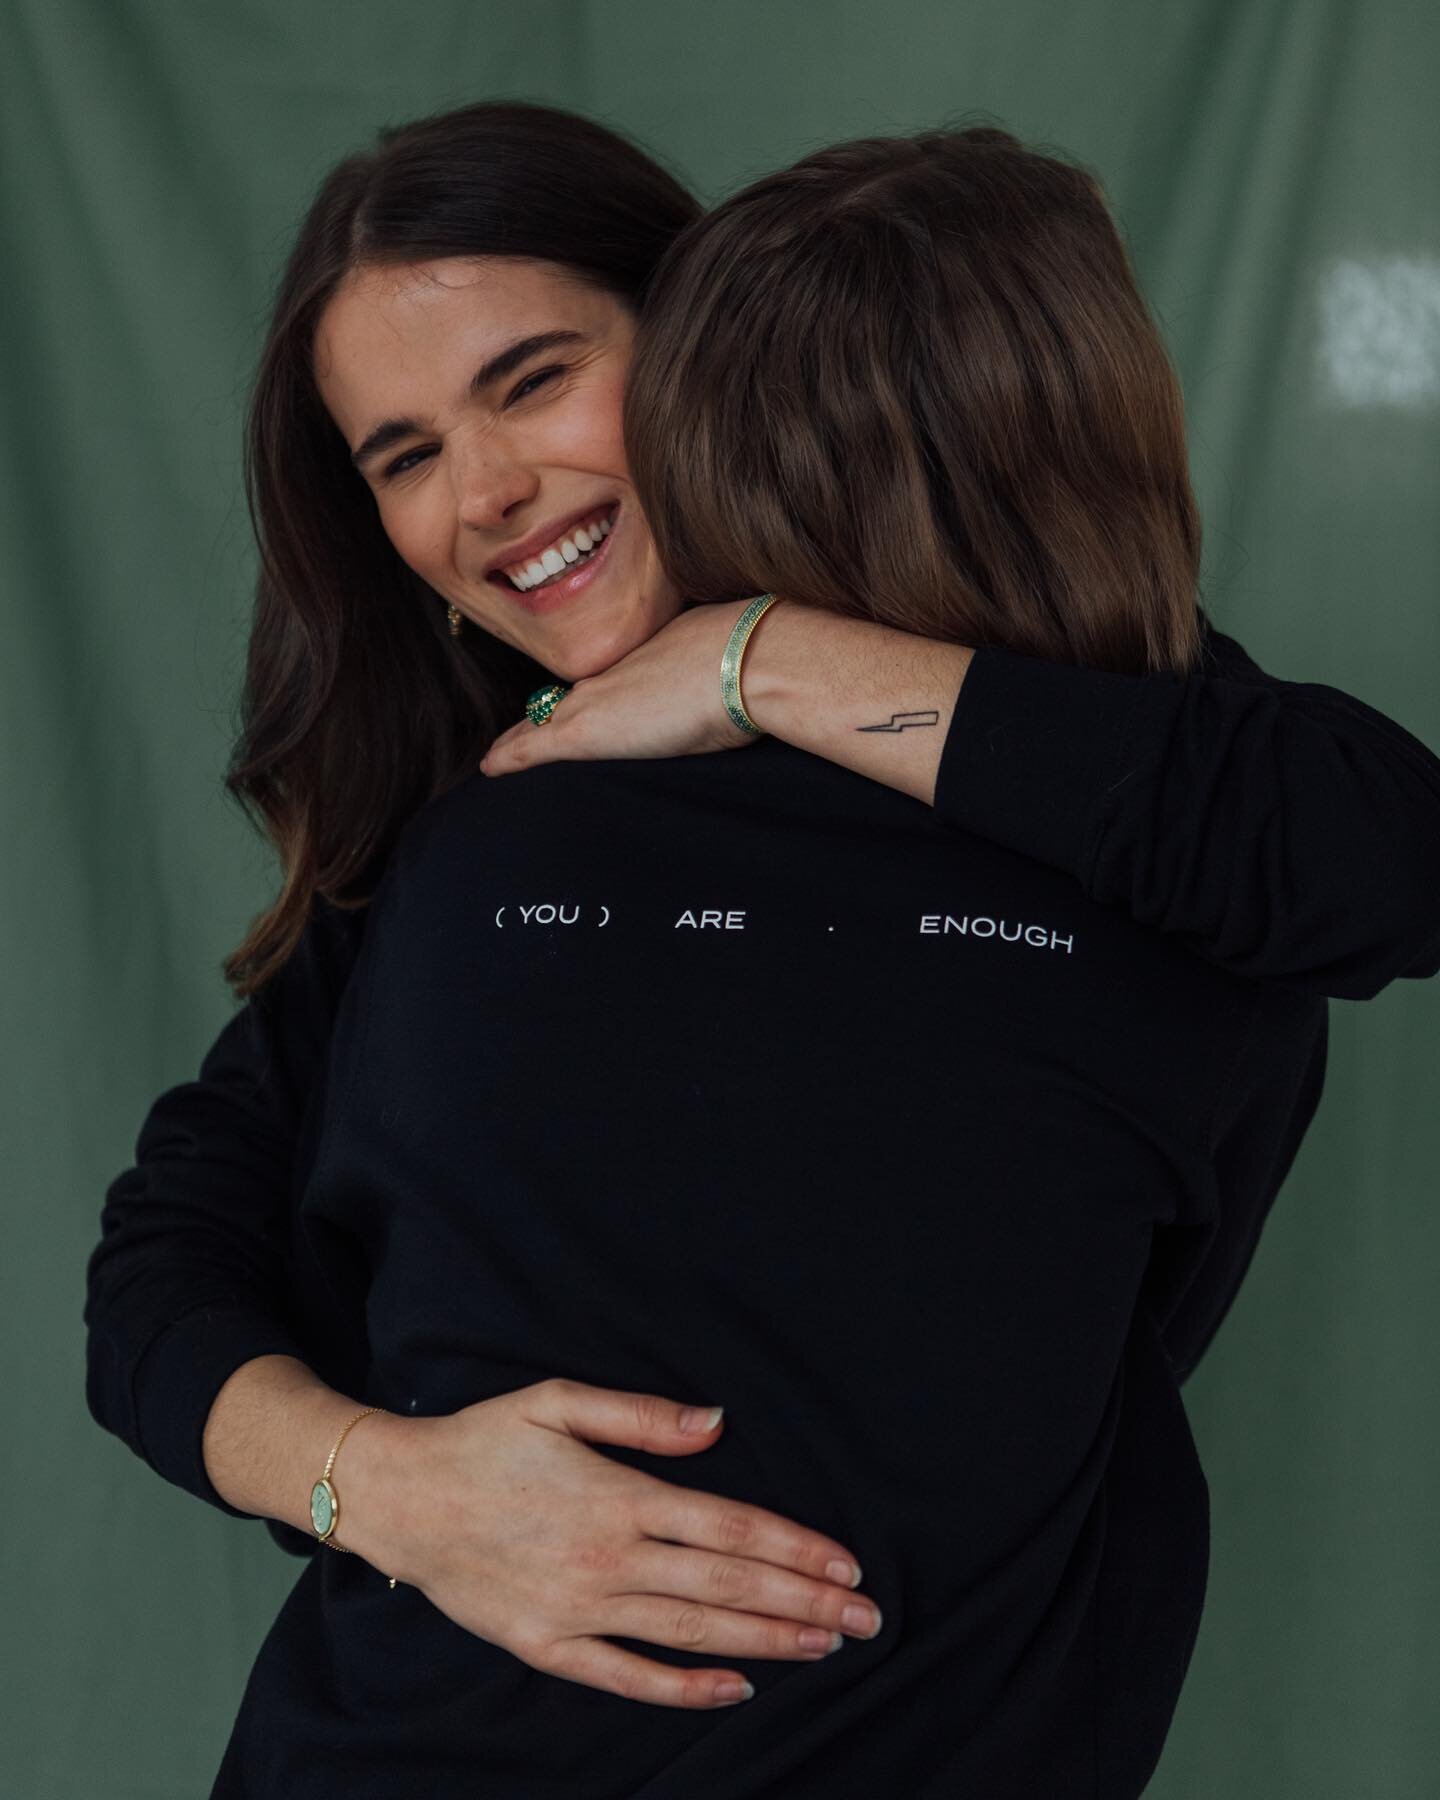 Friday's Mission: tell someone today that they are enough. 

It&rsquo;s a simple (YOU) ARE . ENOUGH. We all deserve to hear this simple message. 

#weareenough #iamenough #suicideandco #fashionstyle #sweatshirtseason #suicidebereavement #griefsupport